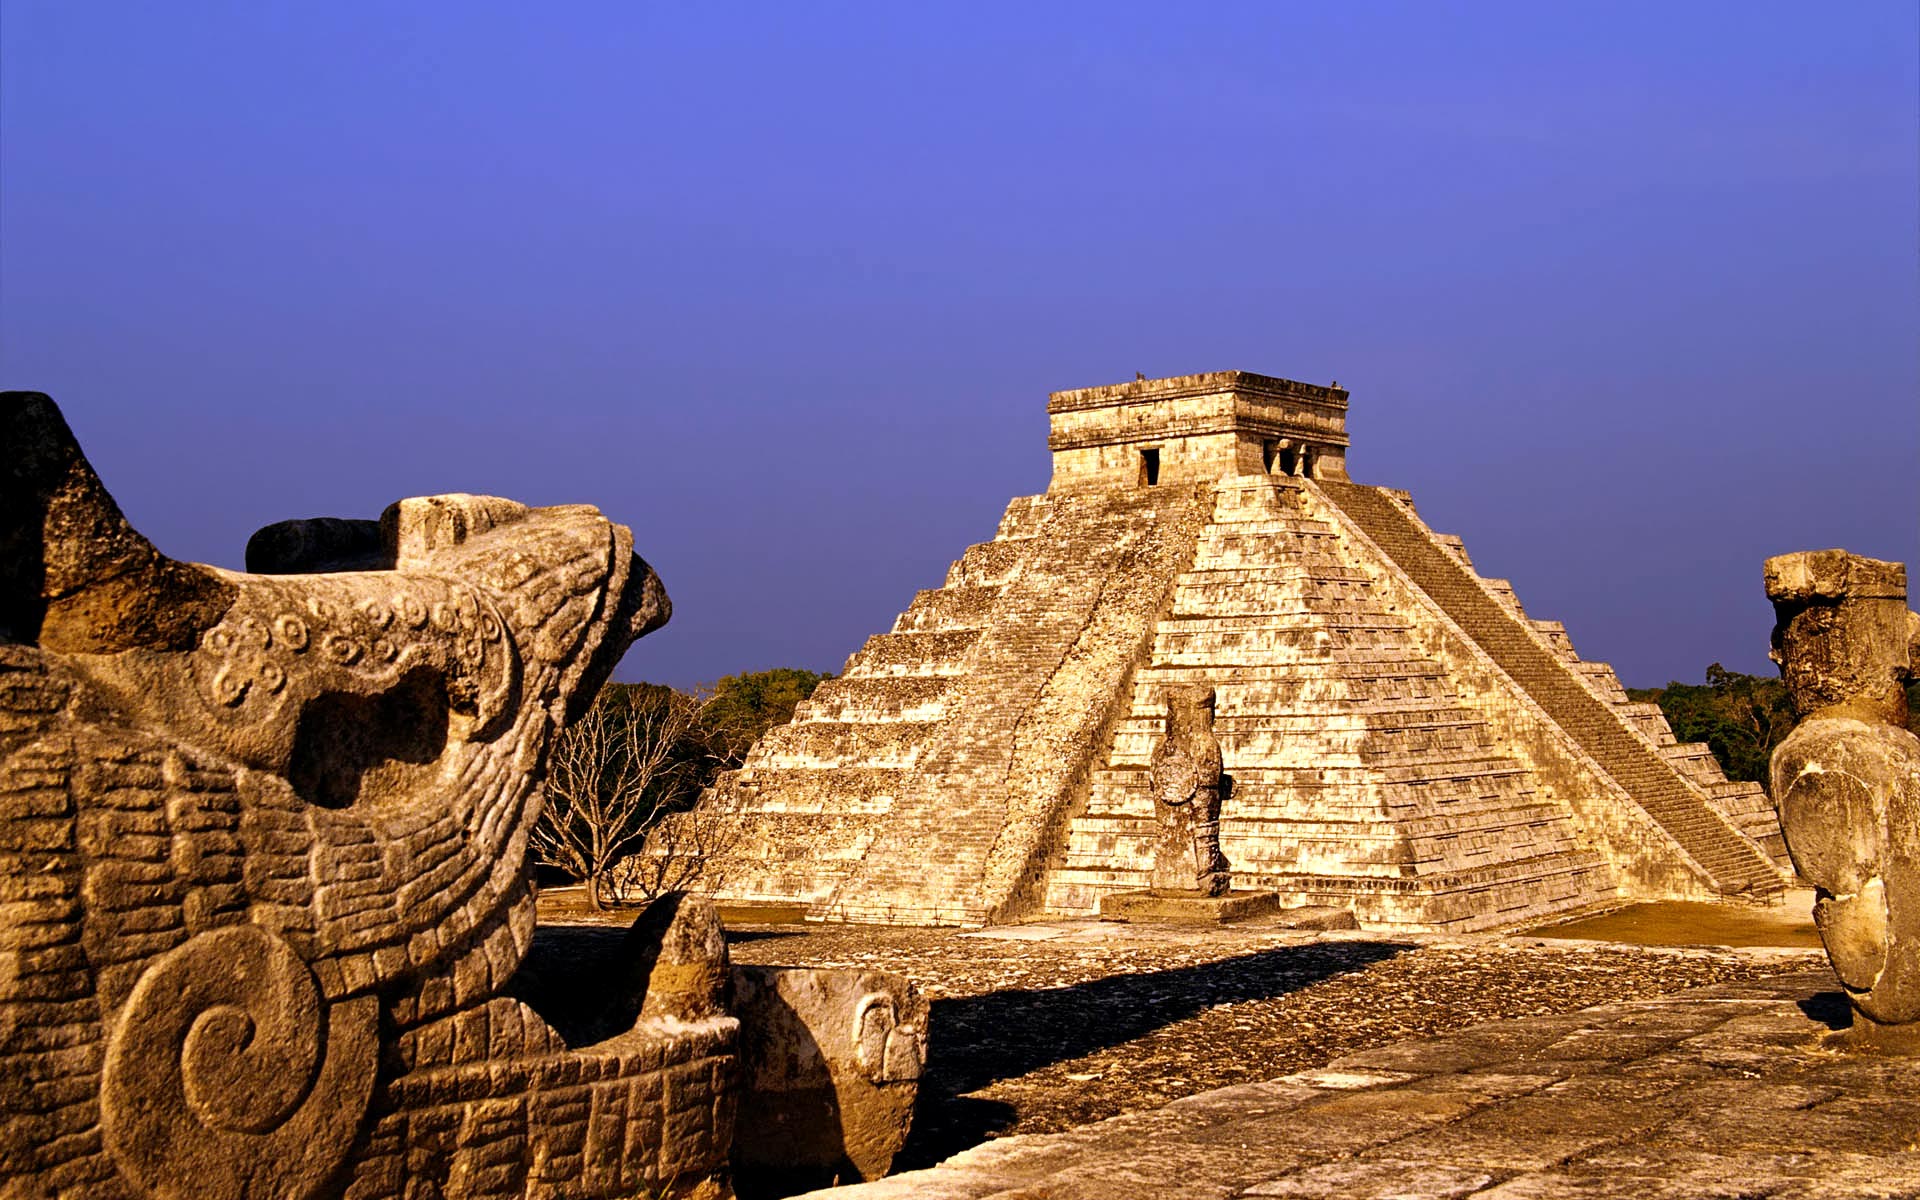  Mexico pyramids backgrounds hd Wallpaper and make this wallpaper for